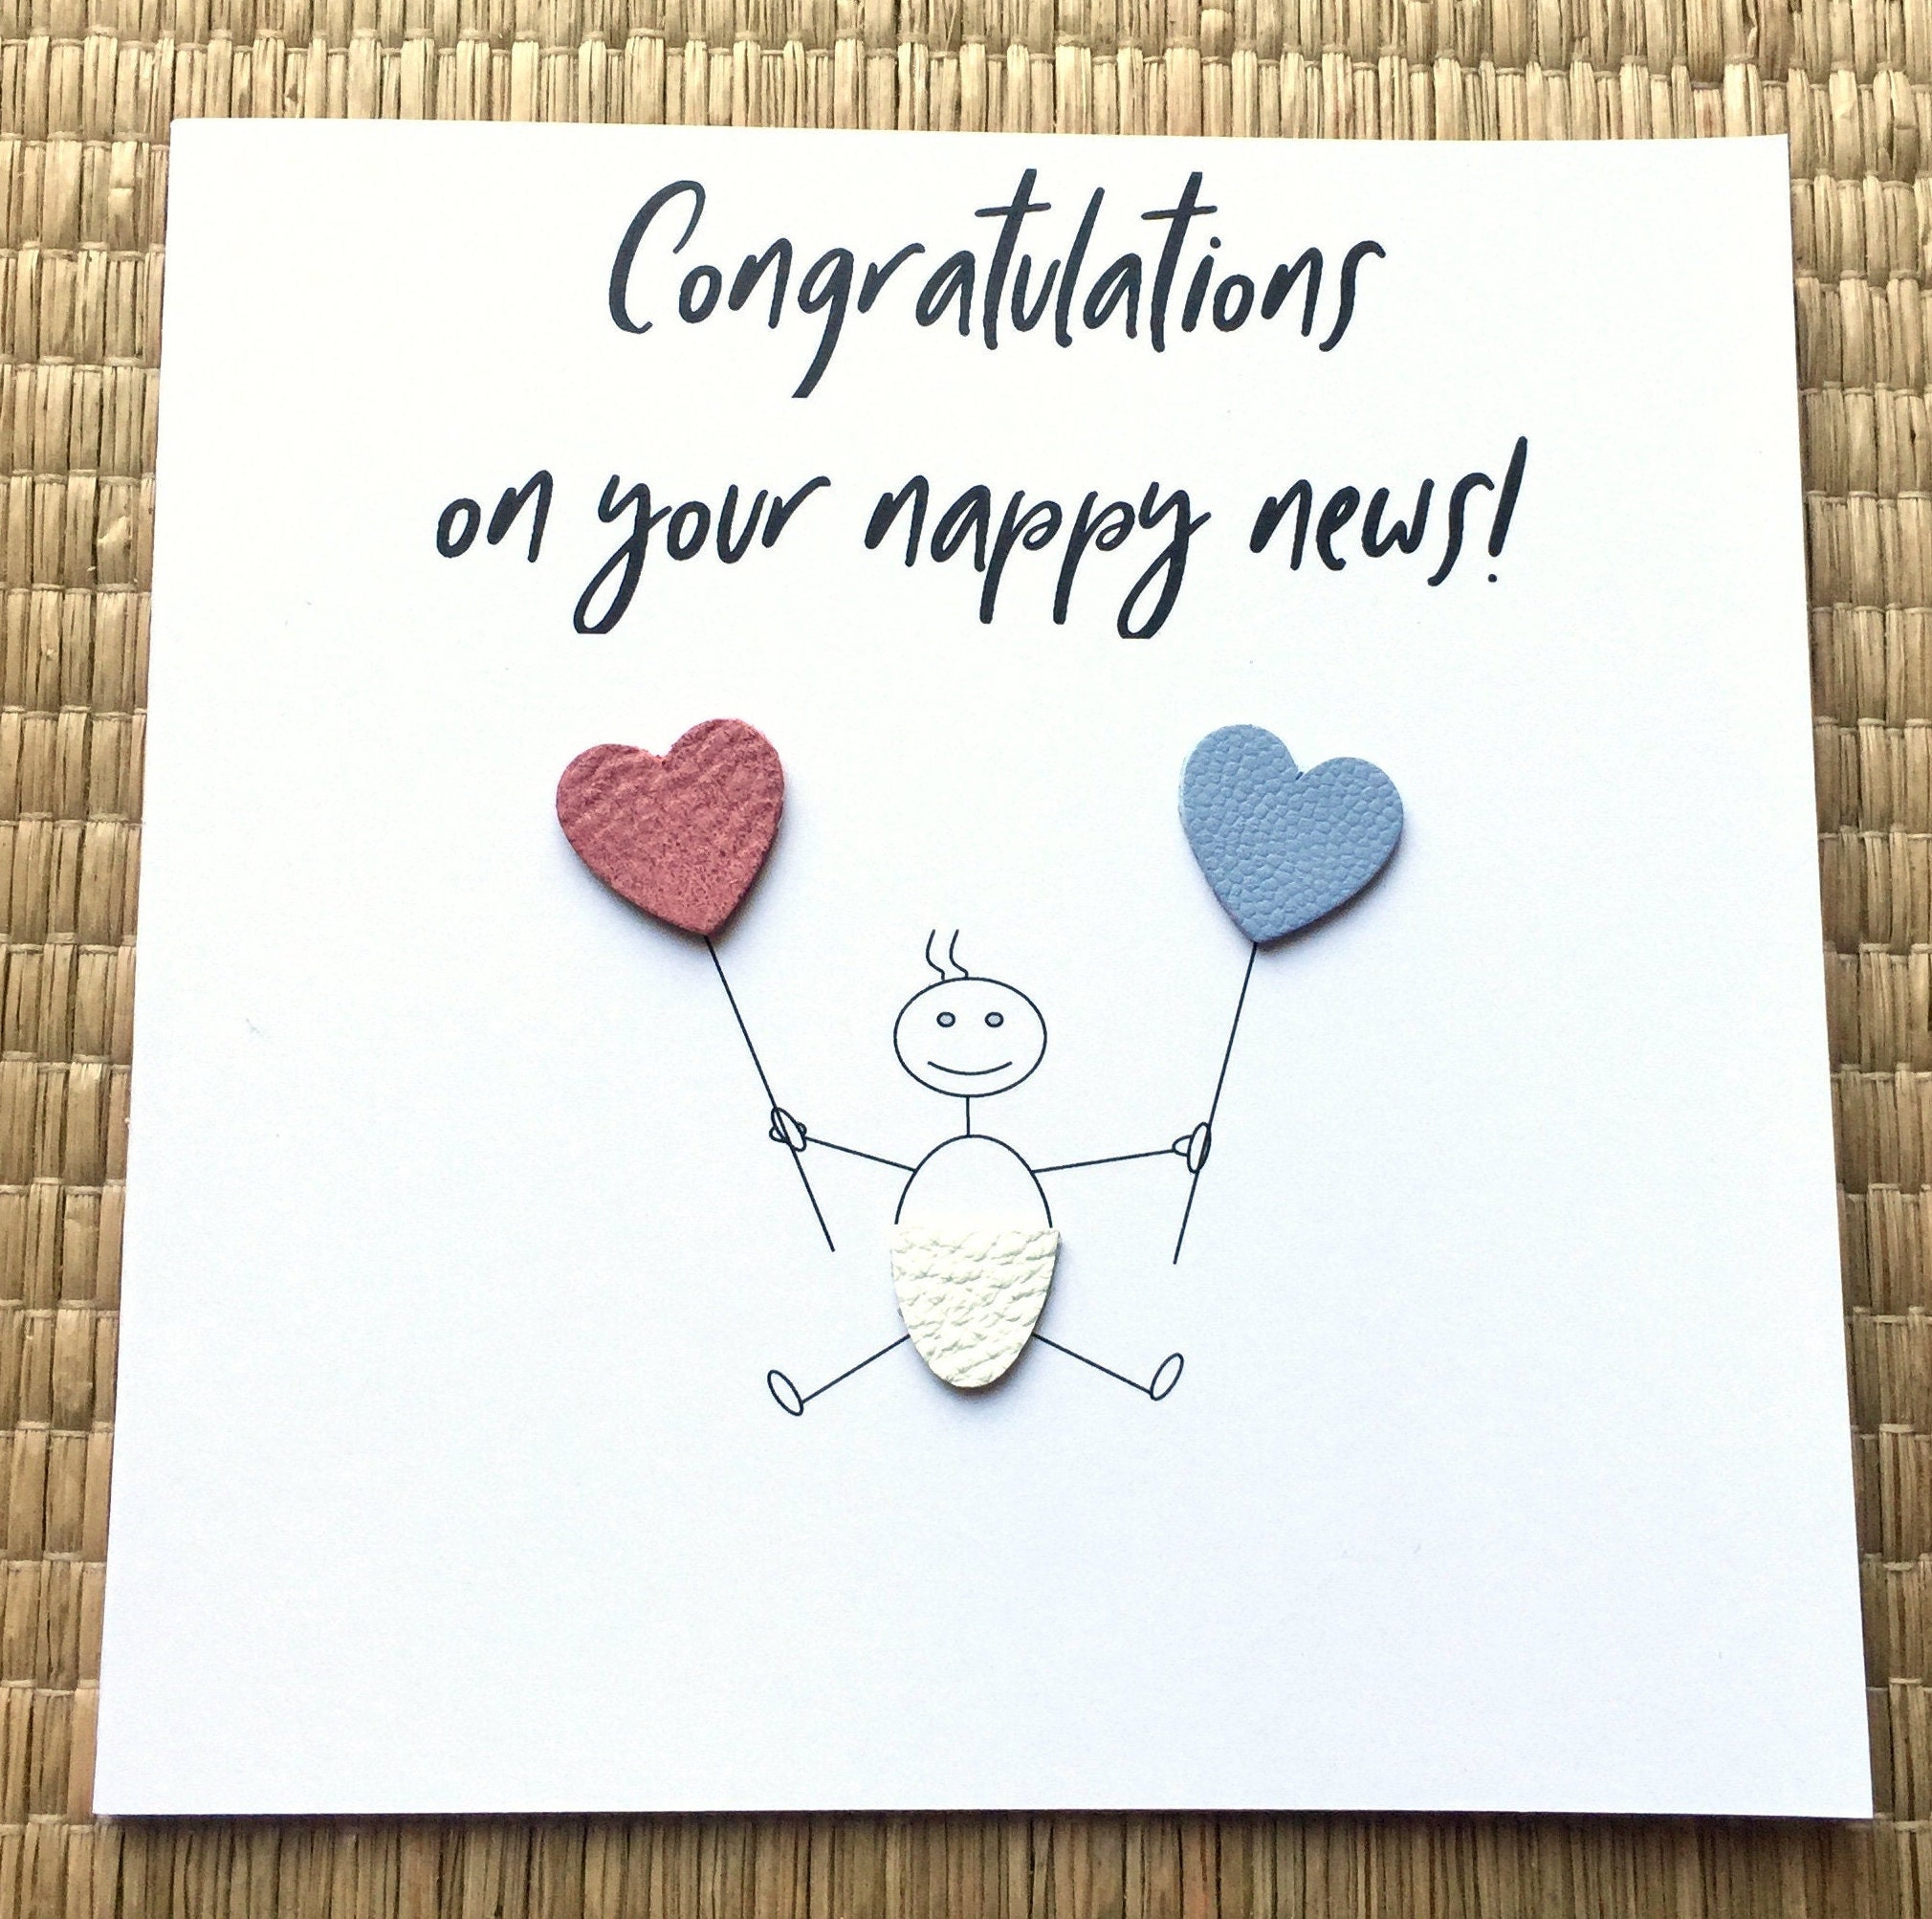 Pregnancy Congratulations Card Nappy News New Arrival Due Expecting 